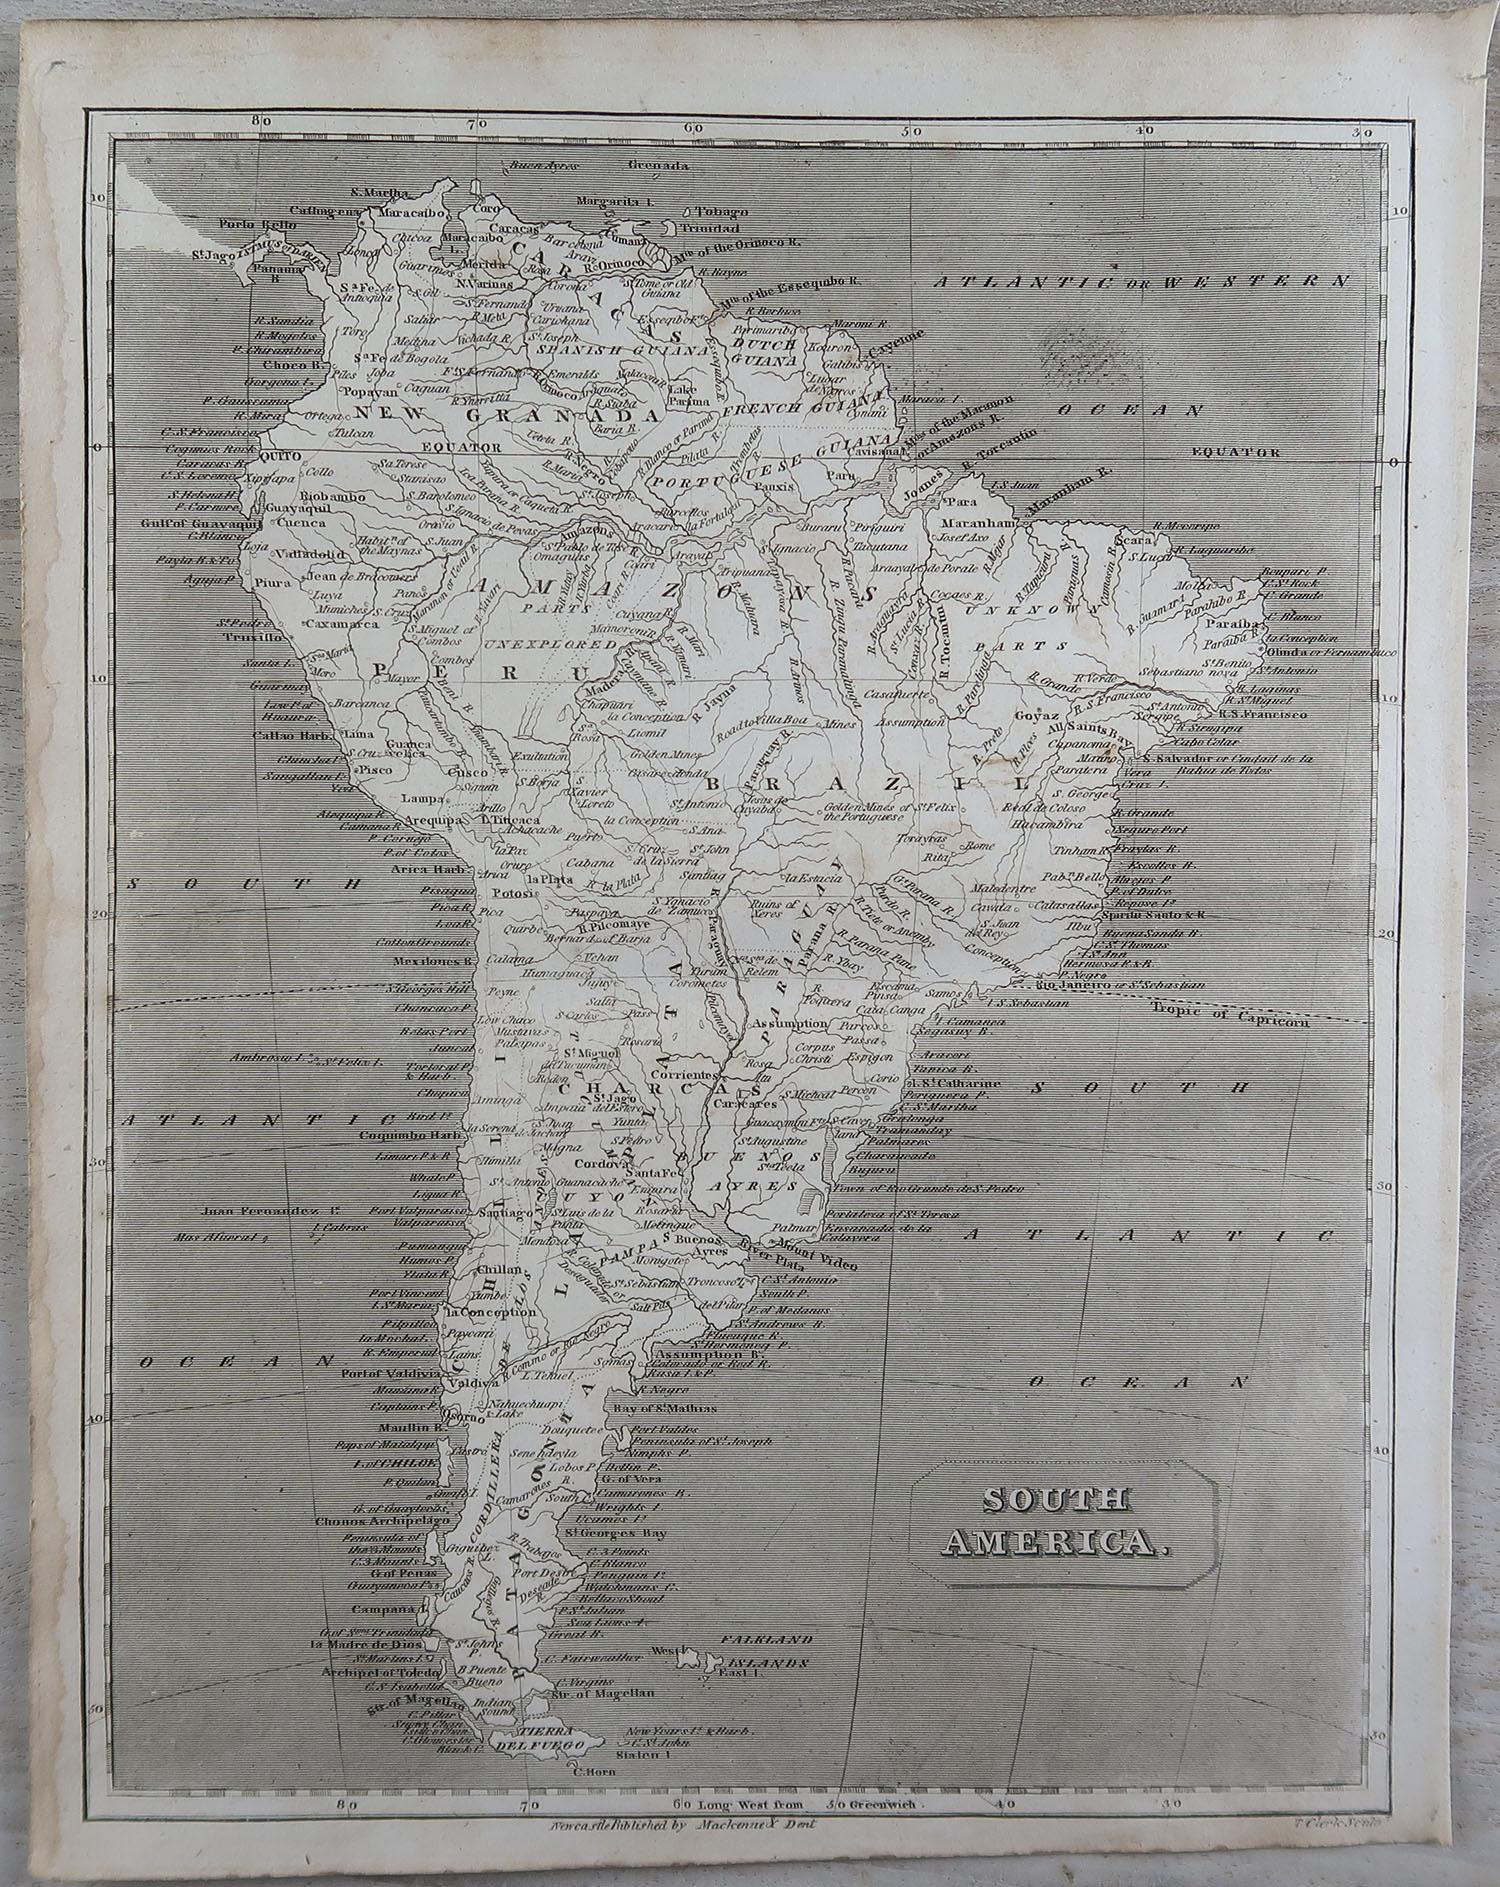 Great map of South America

Copper-plate engraving

Drawn and engraved by Thomas Clerk, Edinburgh.

Published by Mackenzie And Dent, 1817

Unframed.